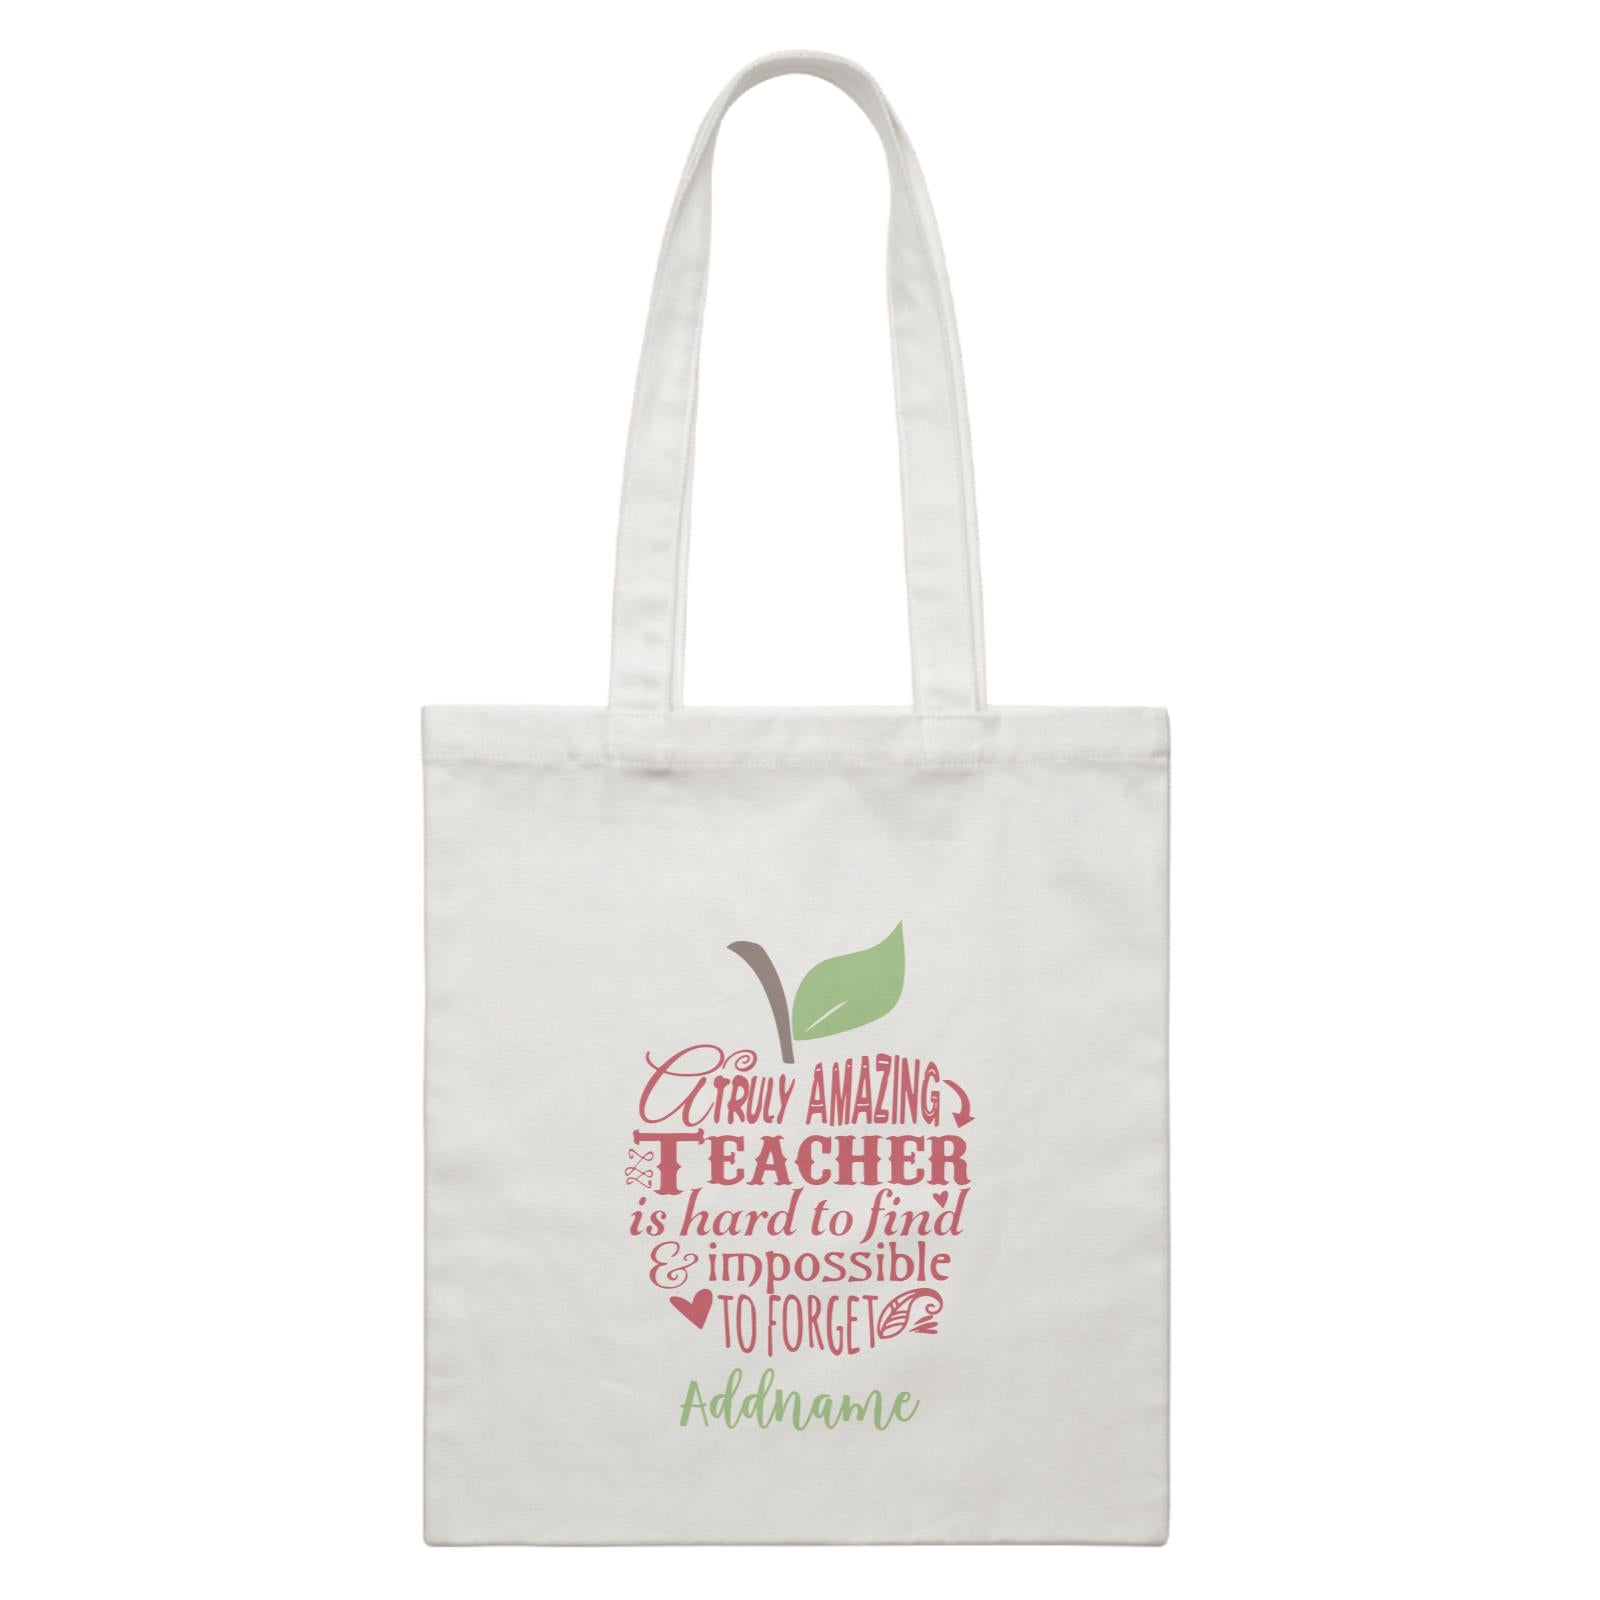 Teacher Apple Truly Amazing Teacher is Had To Find & Impossible To Forget Addname White Canvas Bag